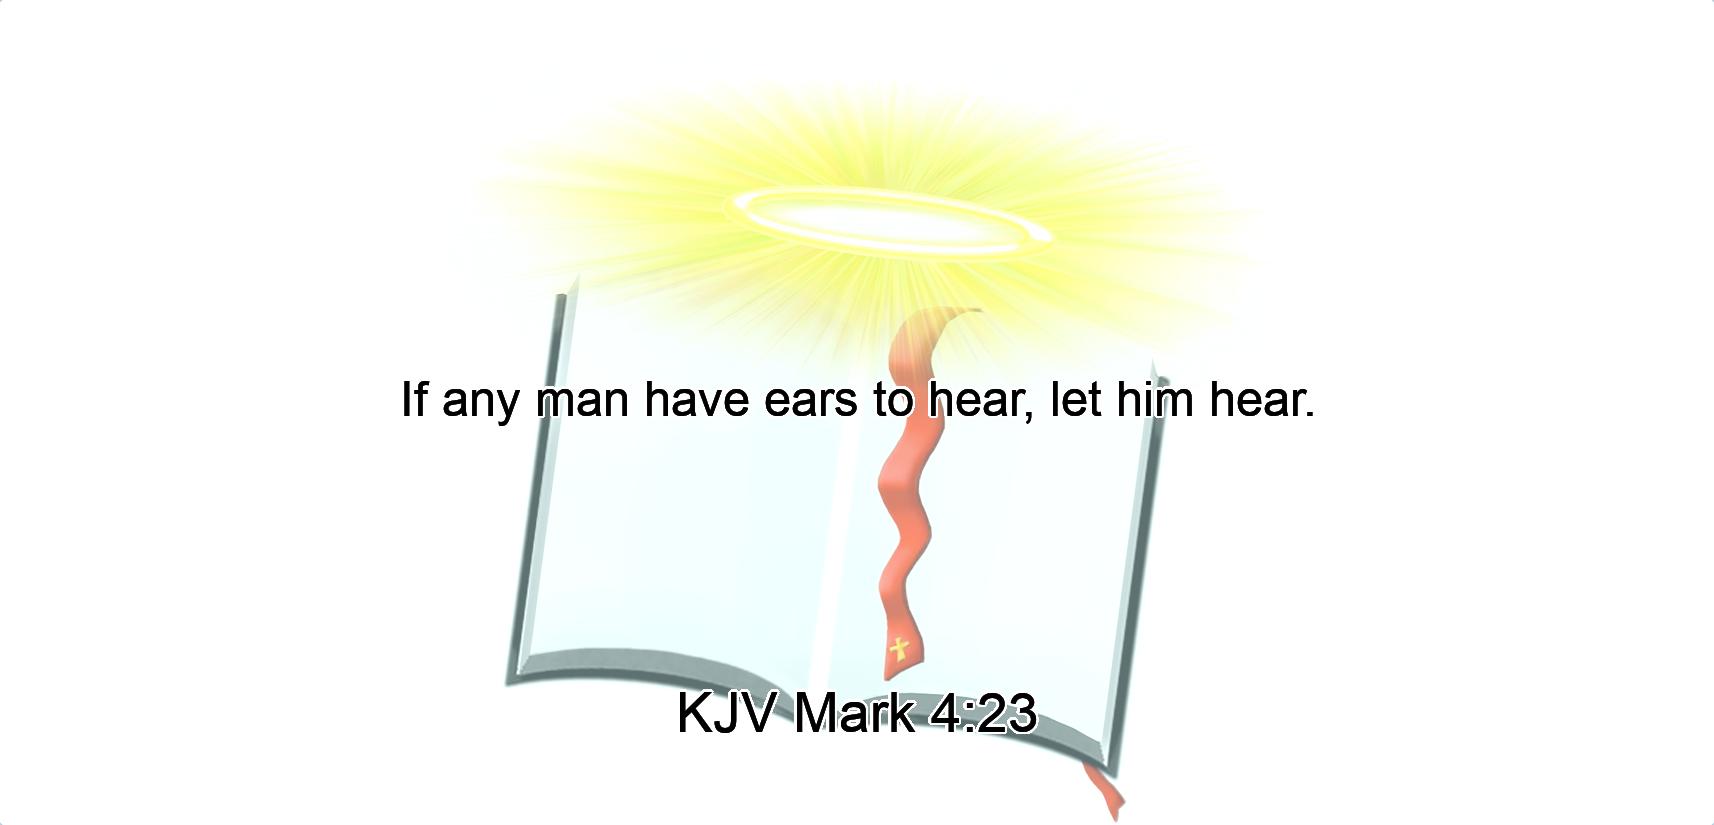 If any man have ears to hear, let him hear.